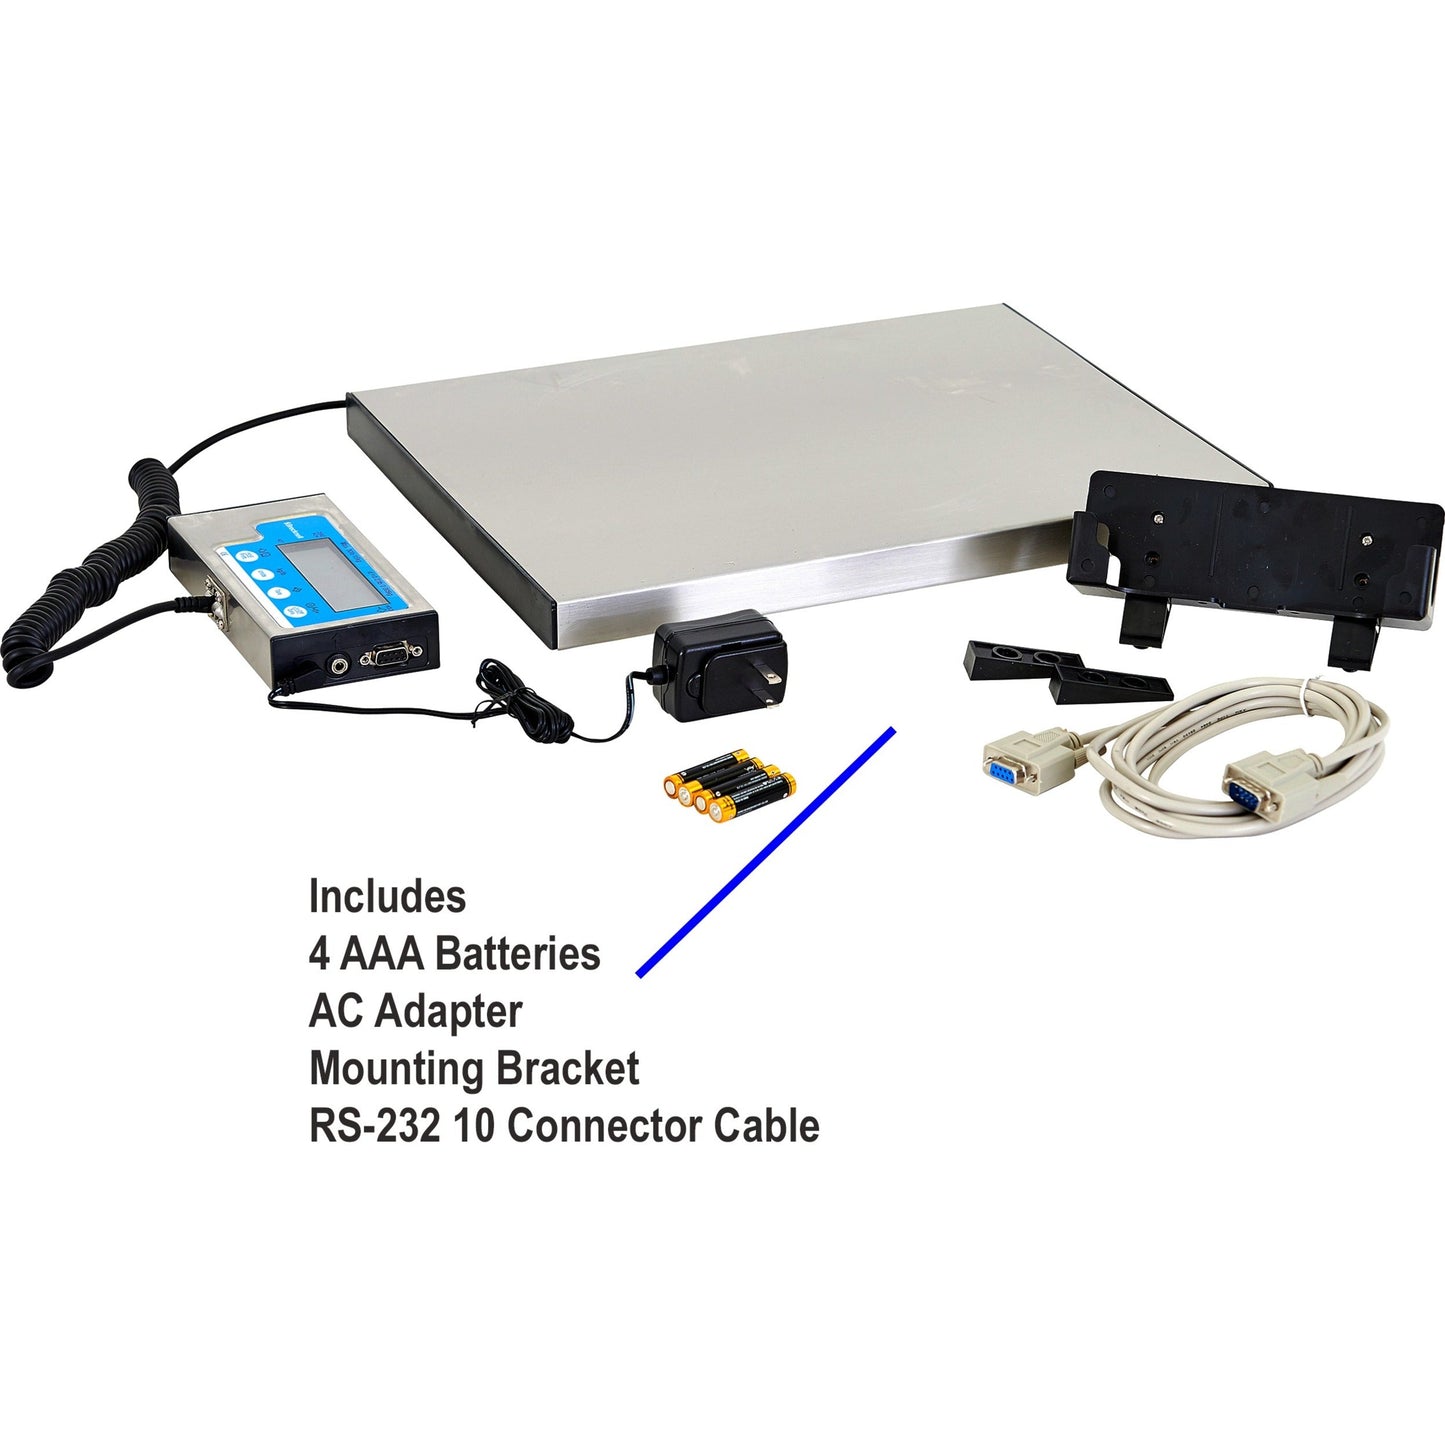 Brecknell LPS-150 Portable Shipping Scale; up to 150lb. Capacity Perfect for Shipping Warehouse applications Plus General Purpose Weighing